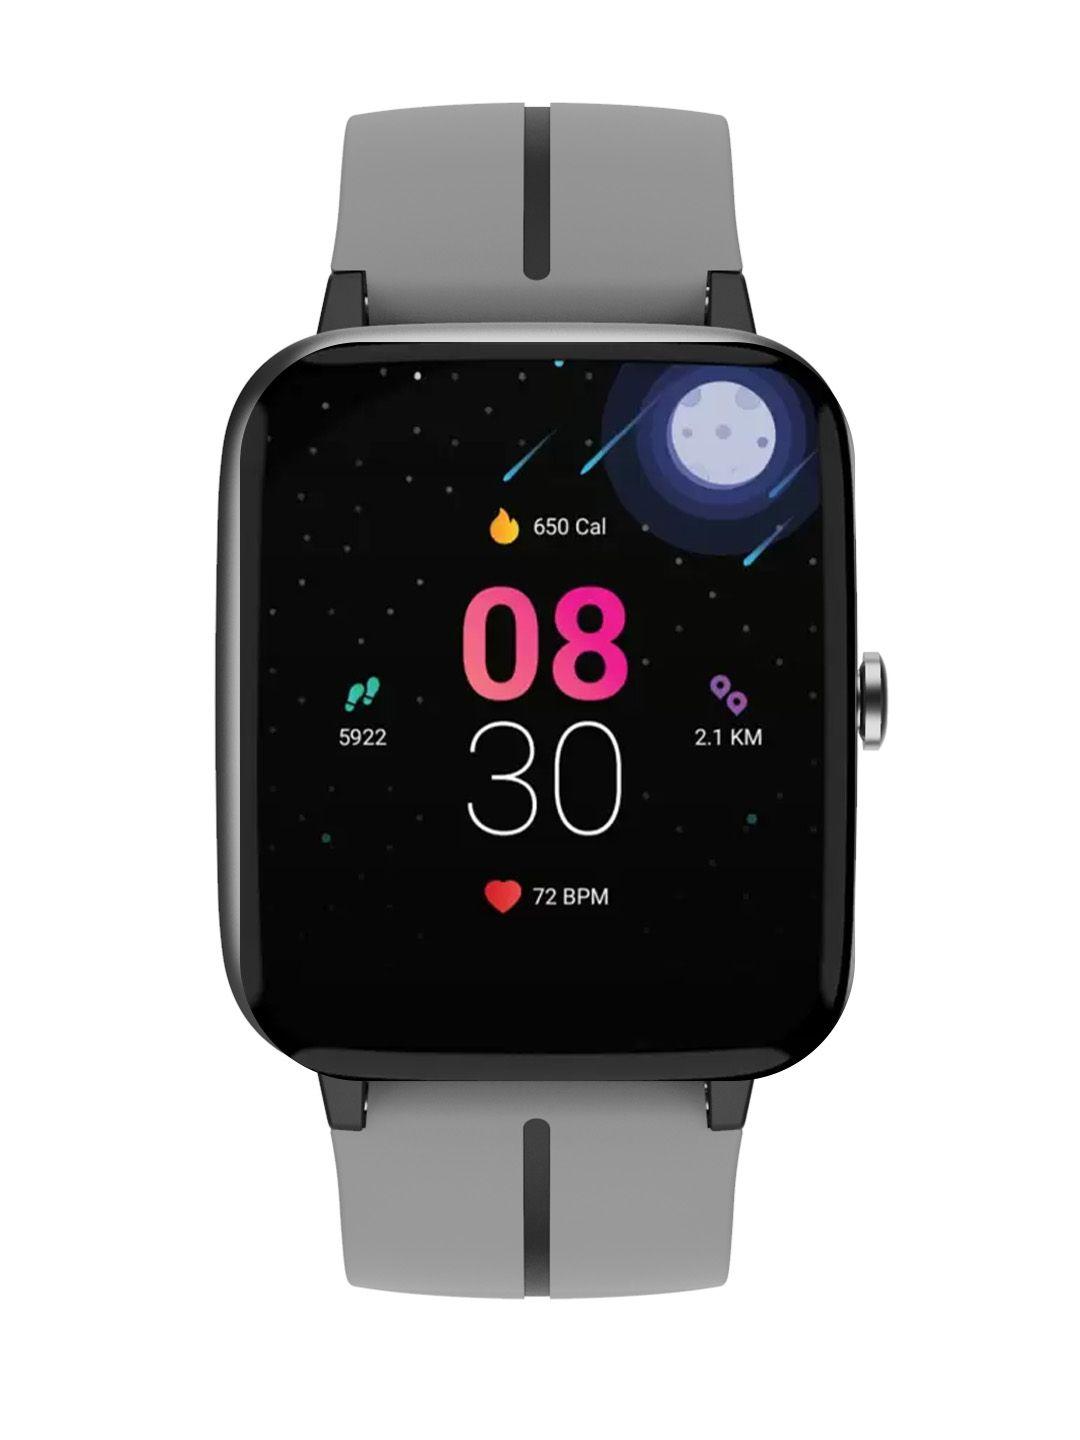 boat grey storm m with curved display & sleep monitor smart watch